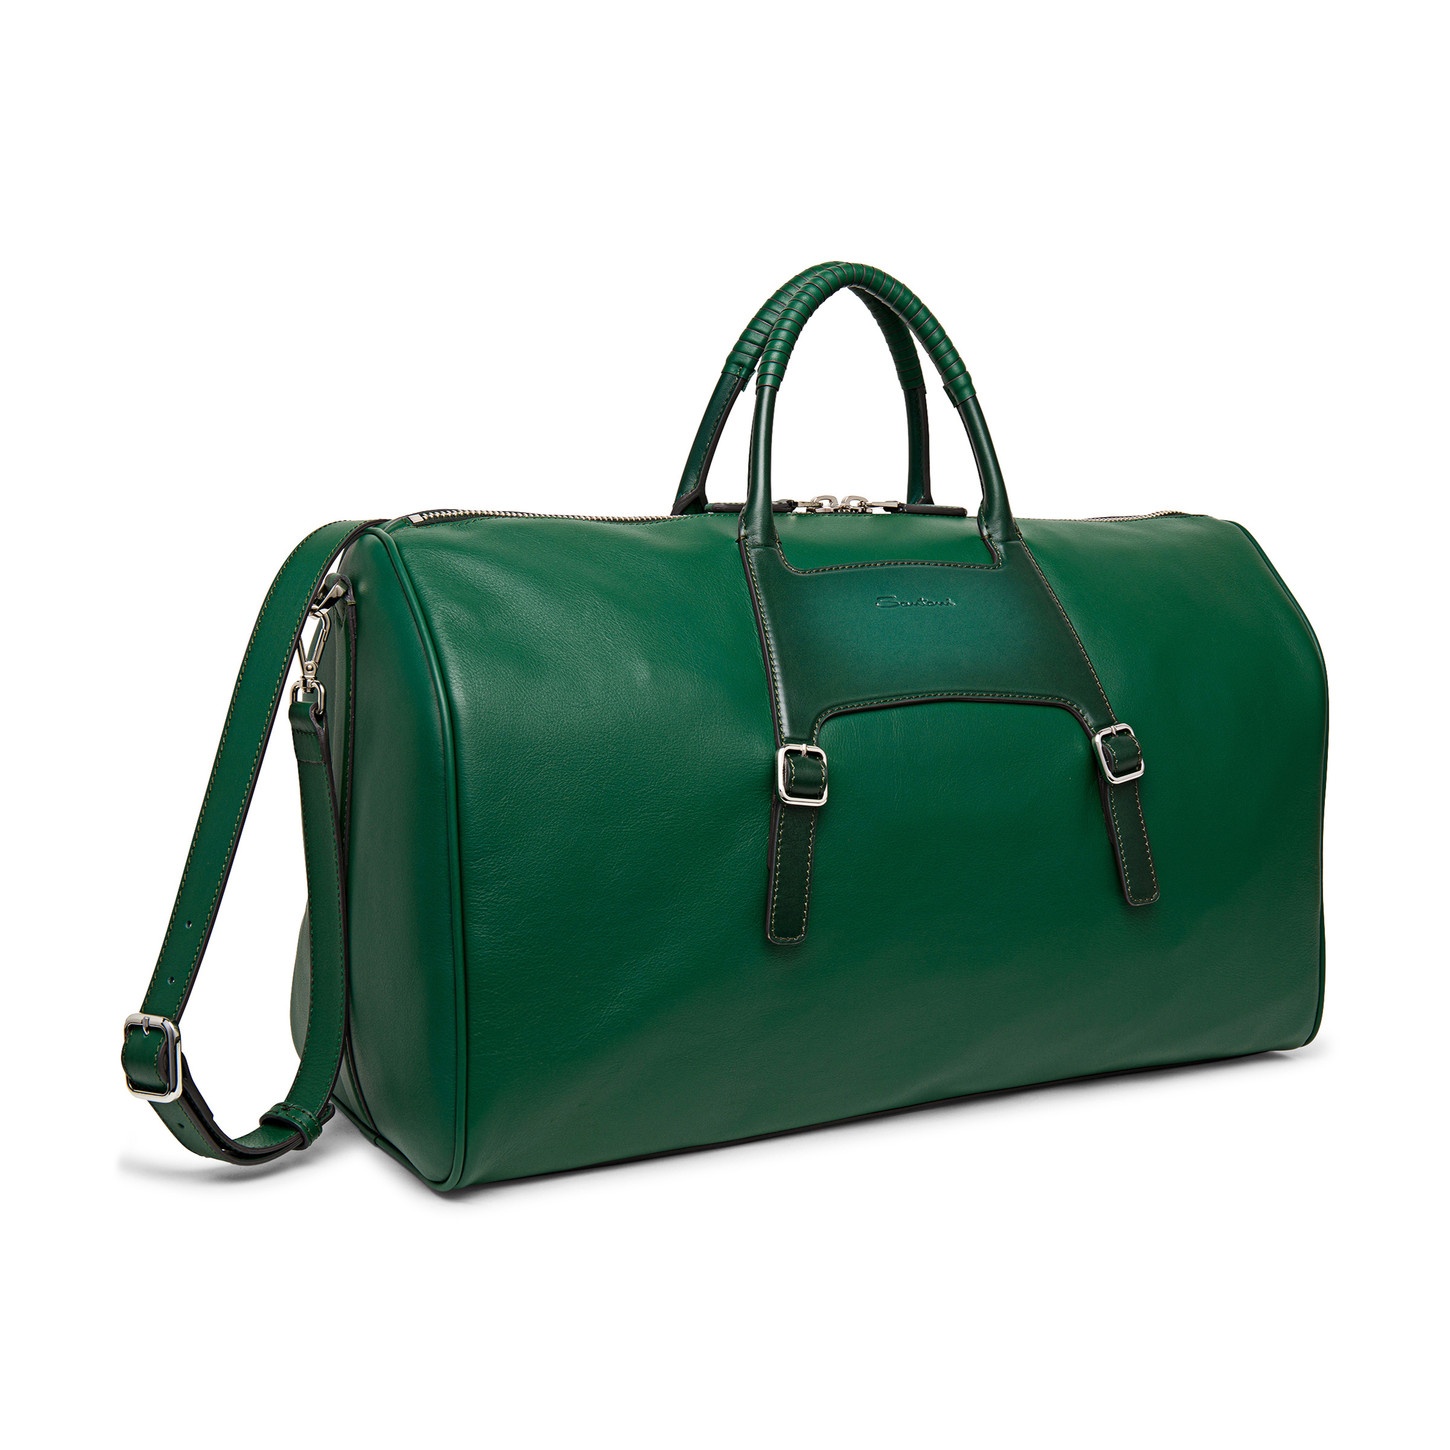 Green leather weekend bag - 5